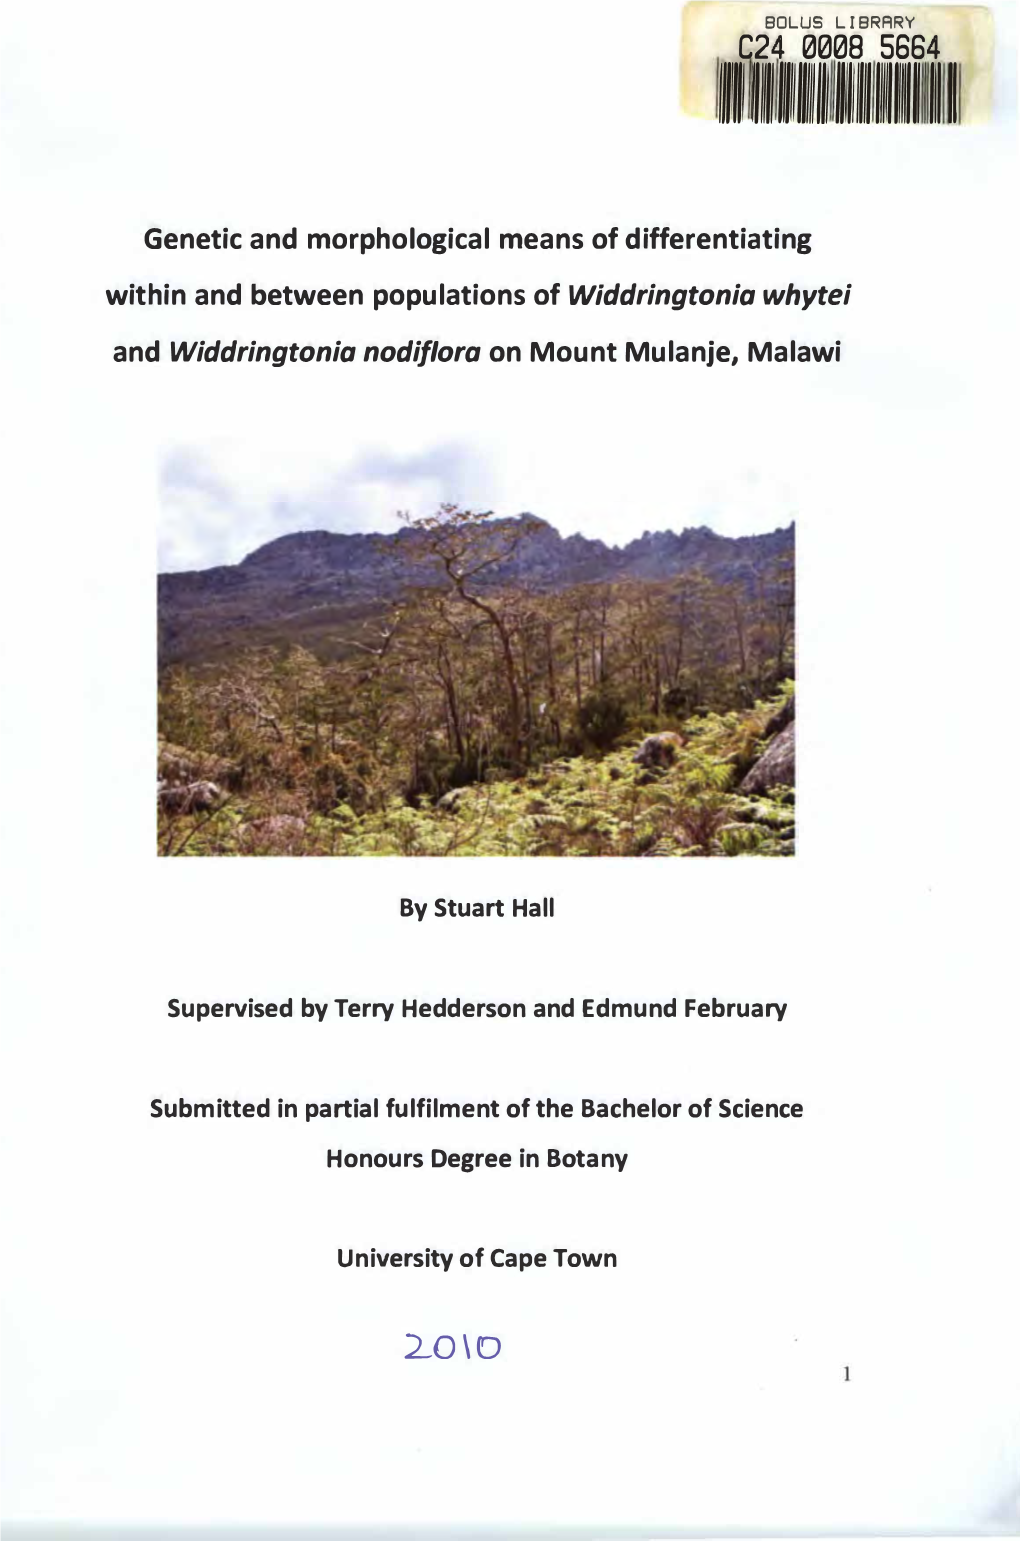 Genetic and Morphological Means of Differentiating Within and Between Populations of Widdringtoniawhytei and Widdringtonia Nodif/Ora on Mount Mulanje, Malawi